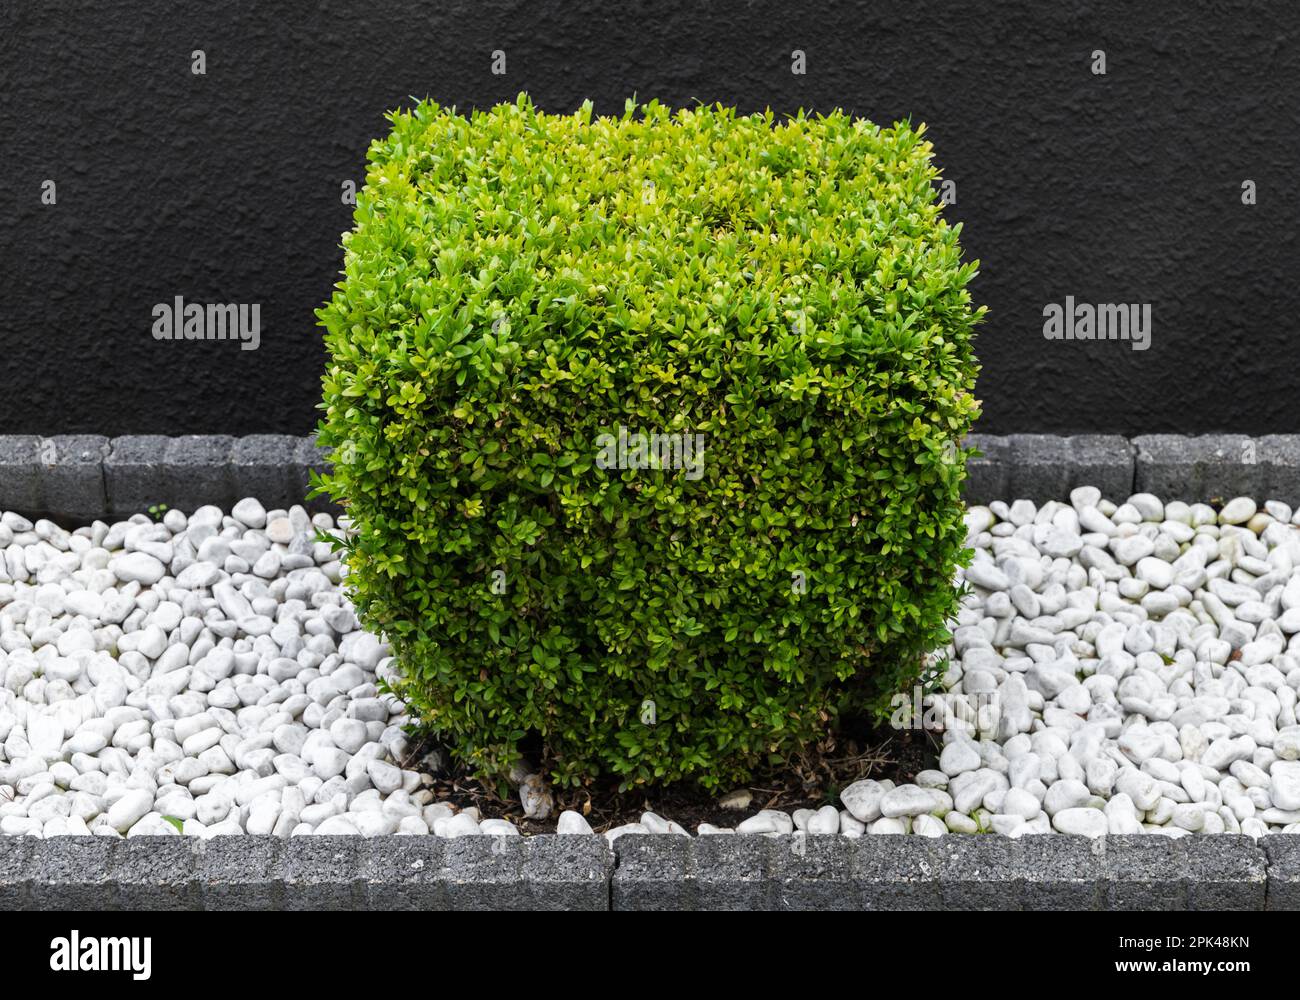 Buxus sinica bush trimmed in shape of cube grows in a garden on white stones in front of black wall Stock Photo